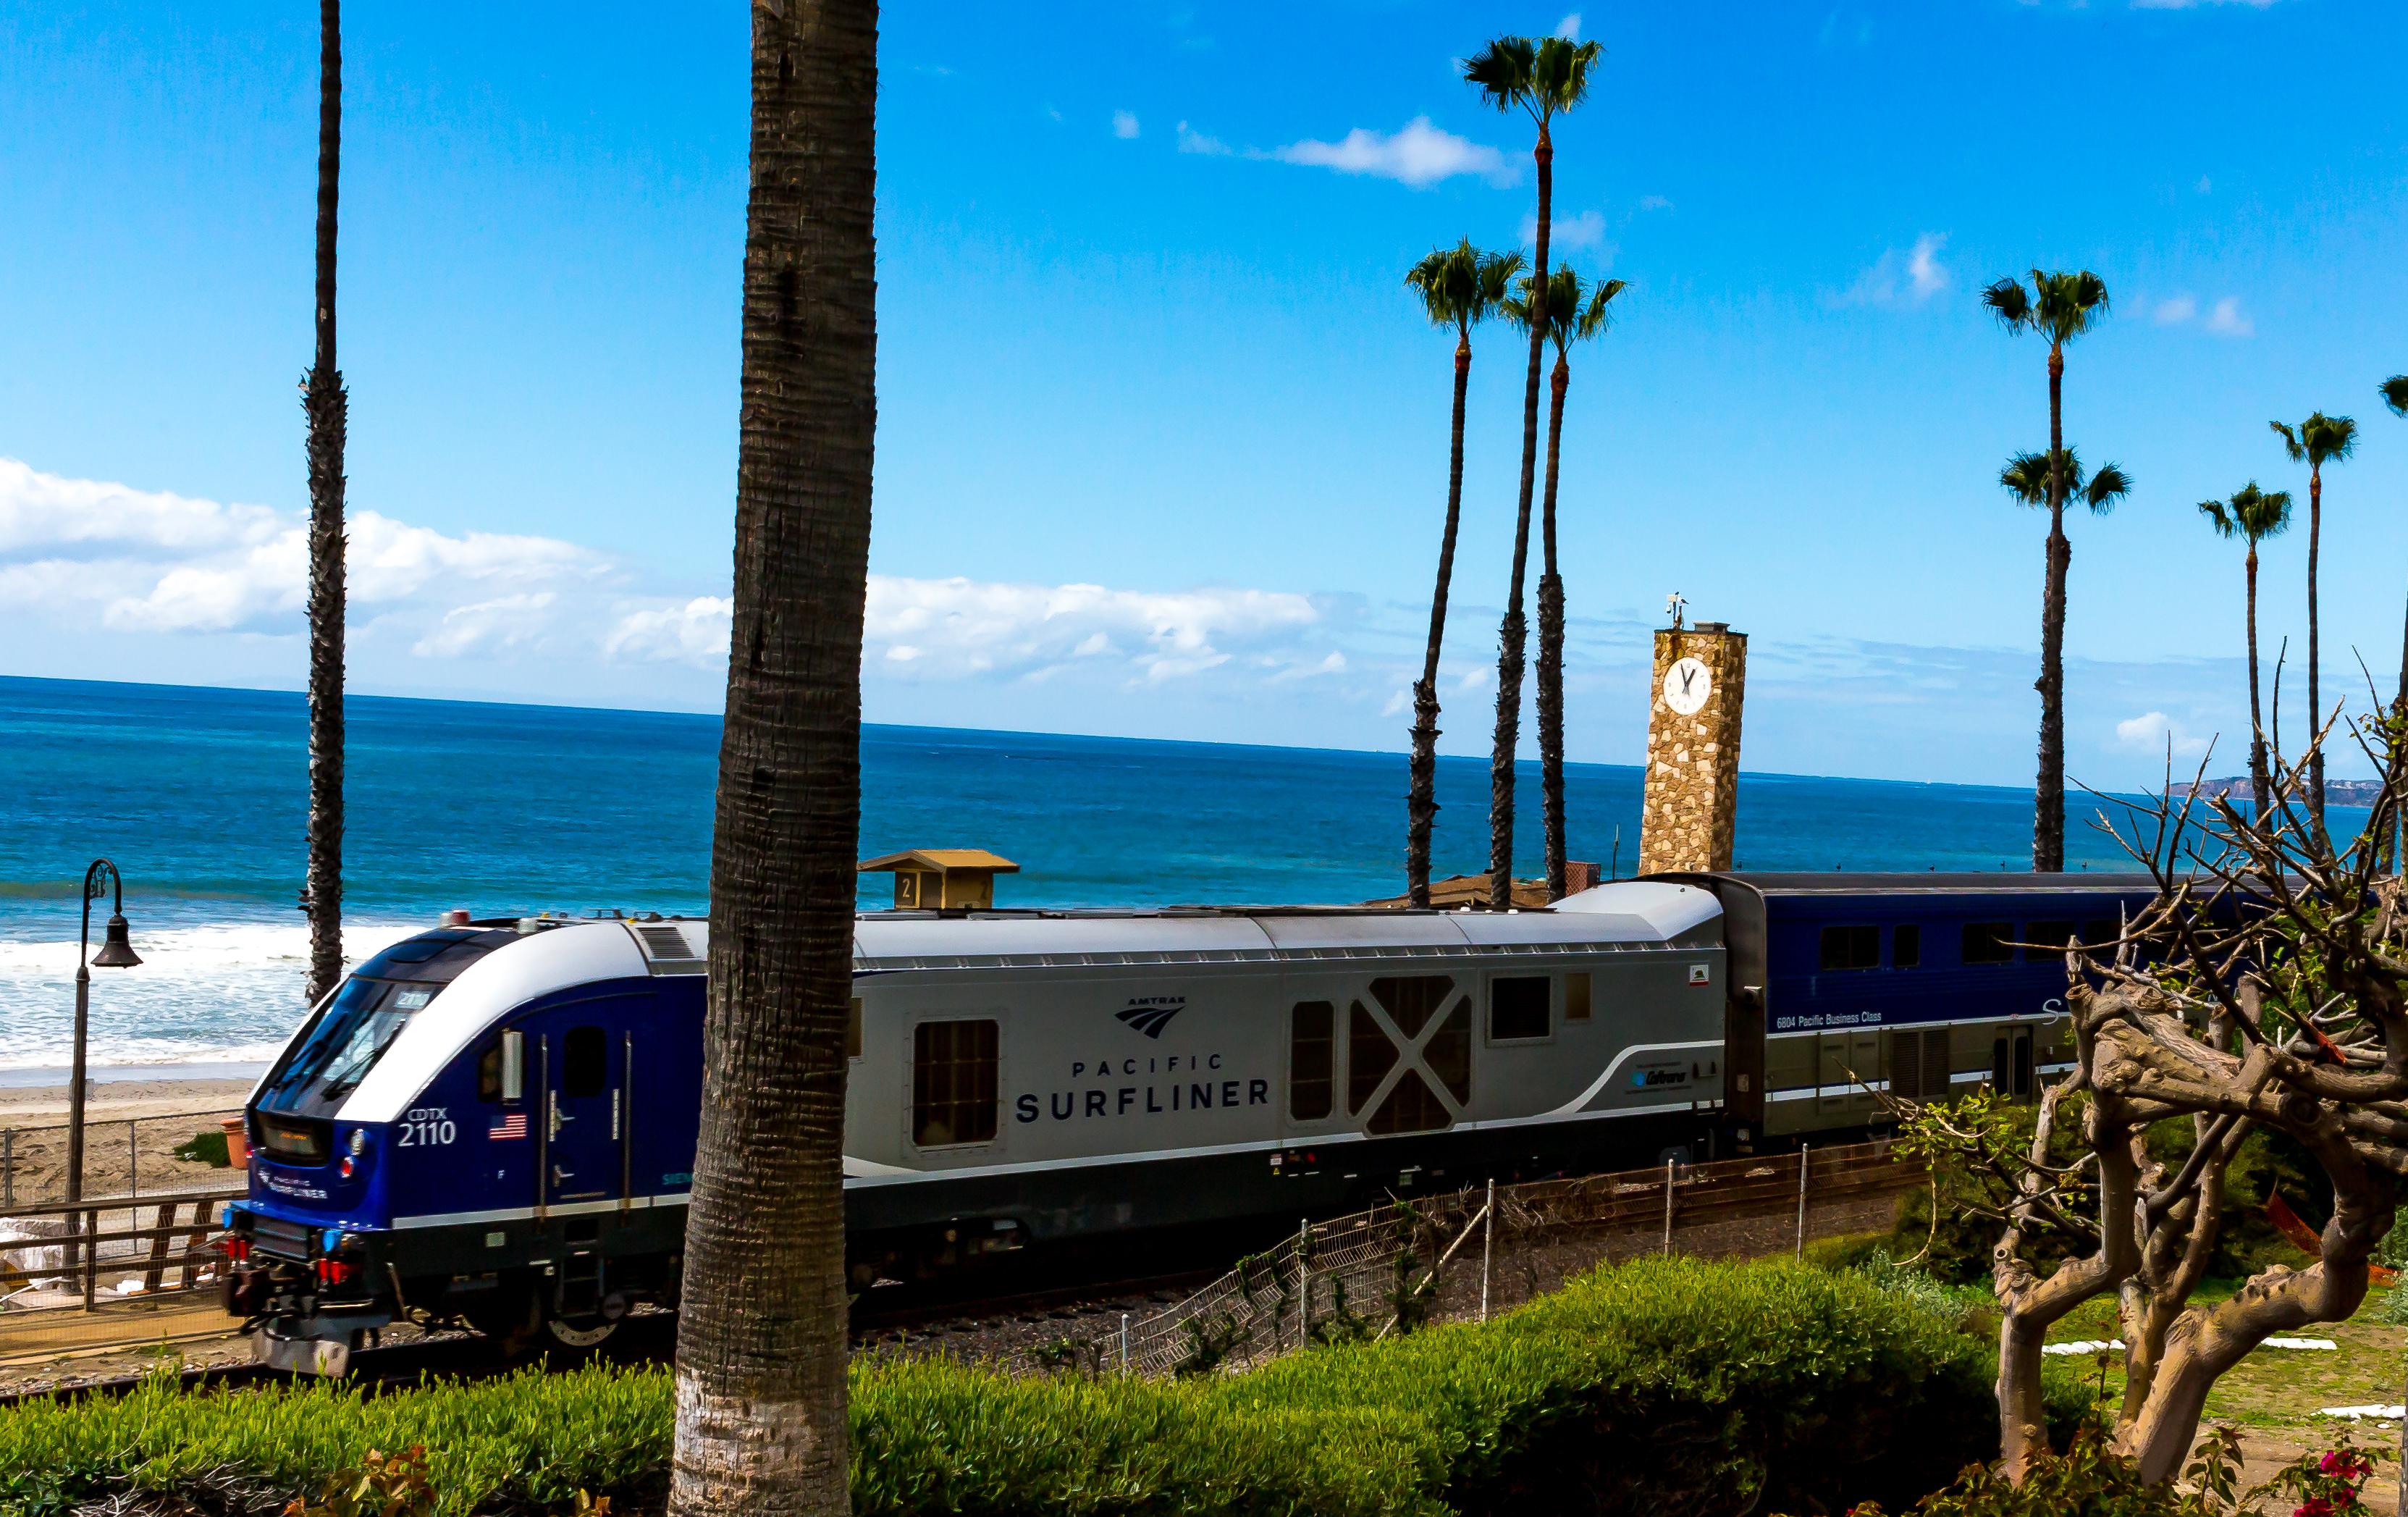 Pacific Surfliner (flickr.com, Cameron Photo, CC BY-ND 2.0 Generic)